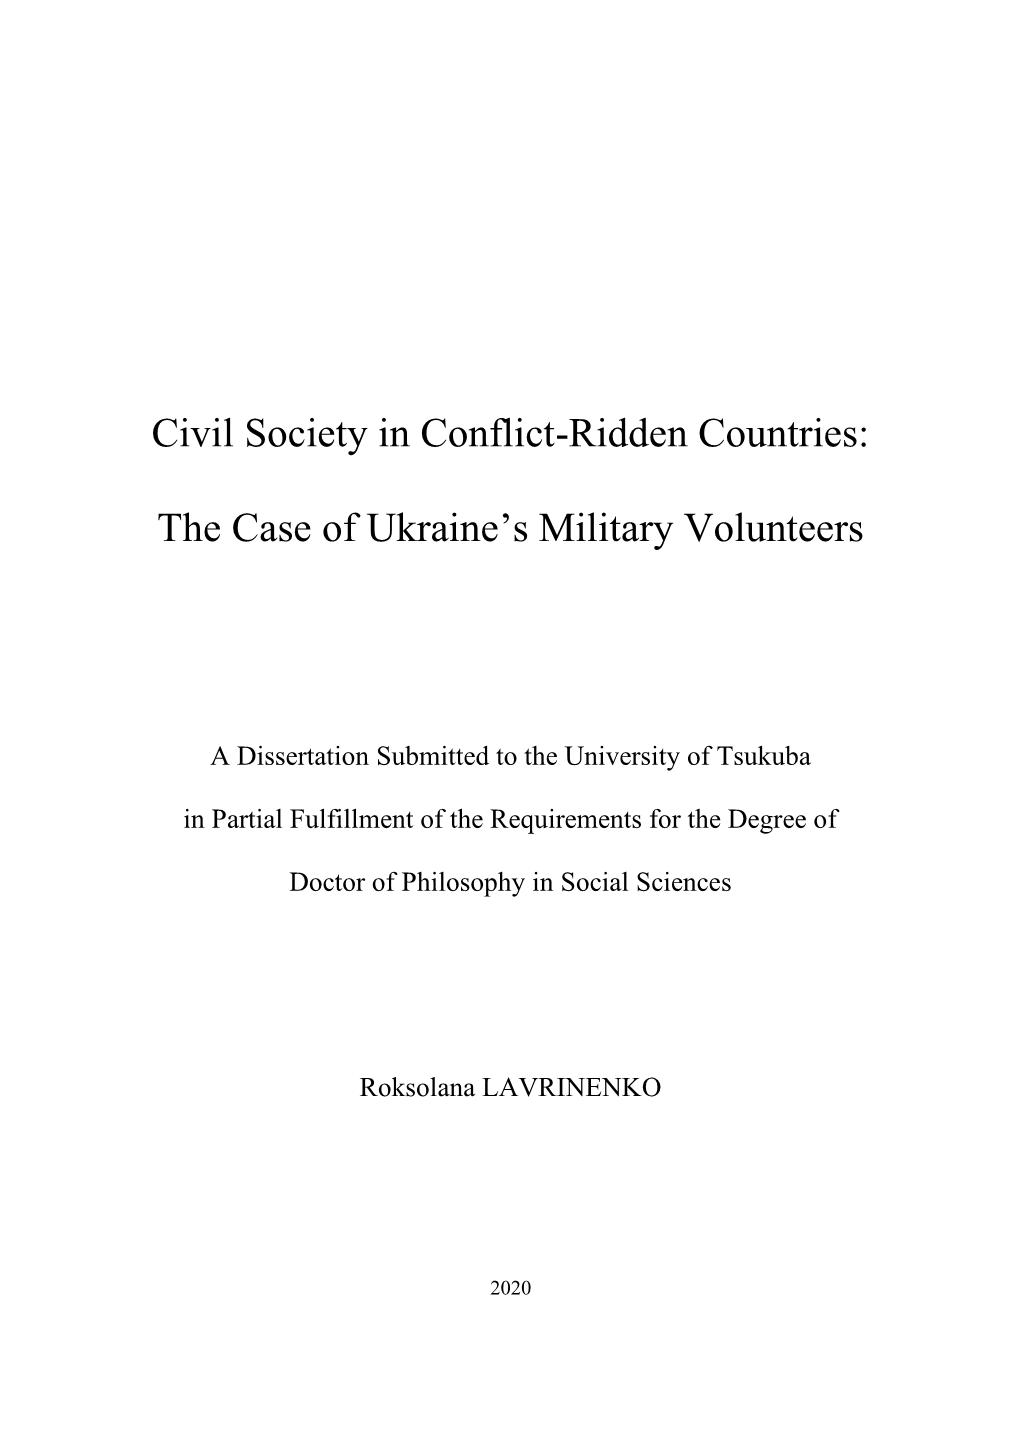 Civil Society in Conflict-Ridden Countries: the Case of Ukraine's